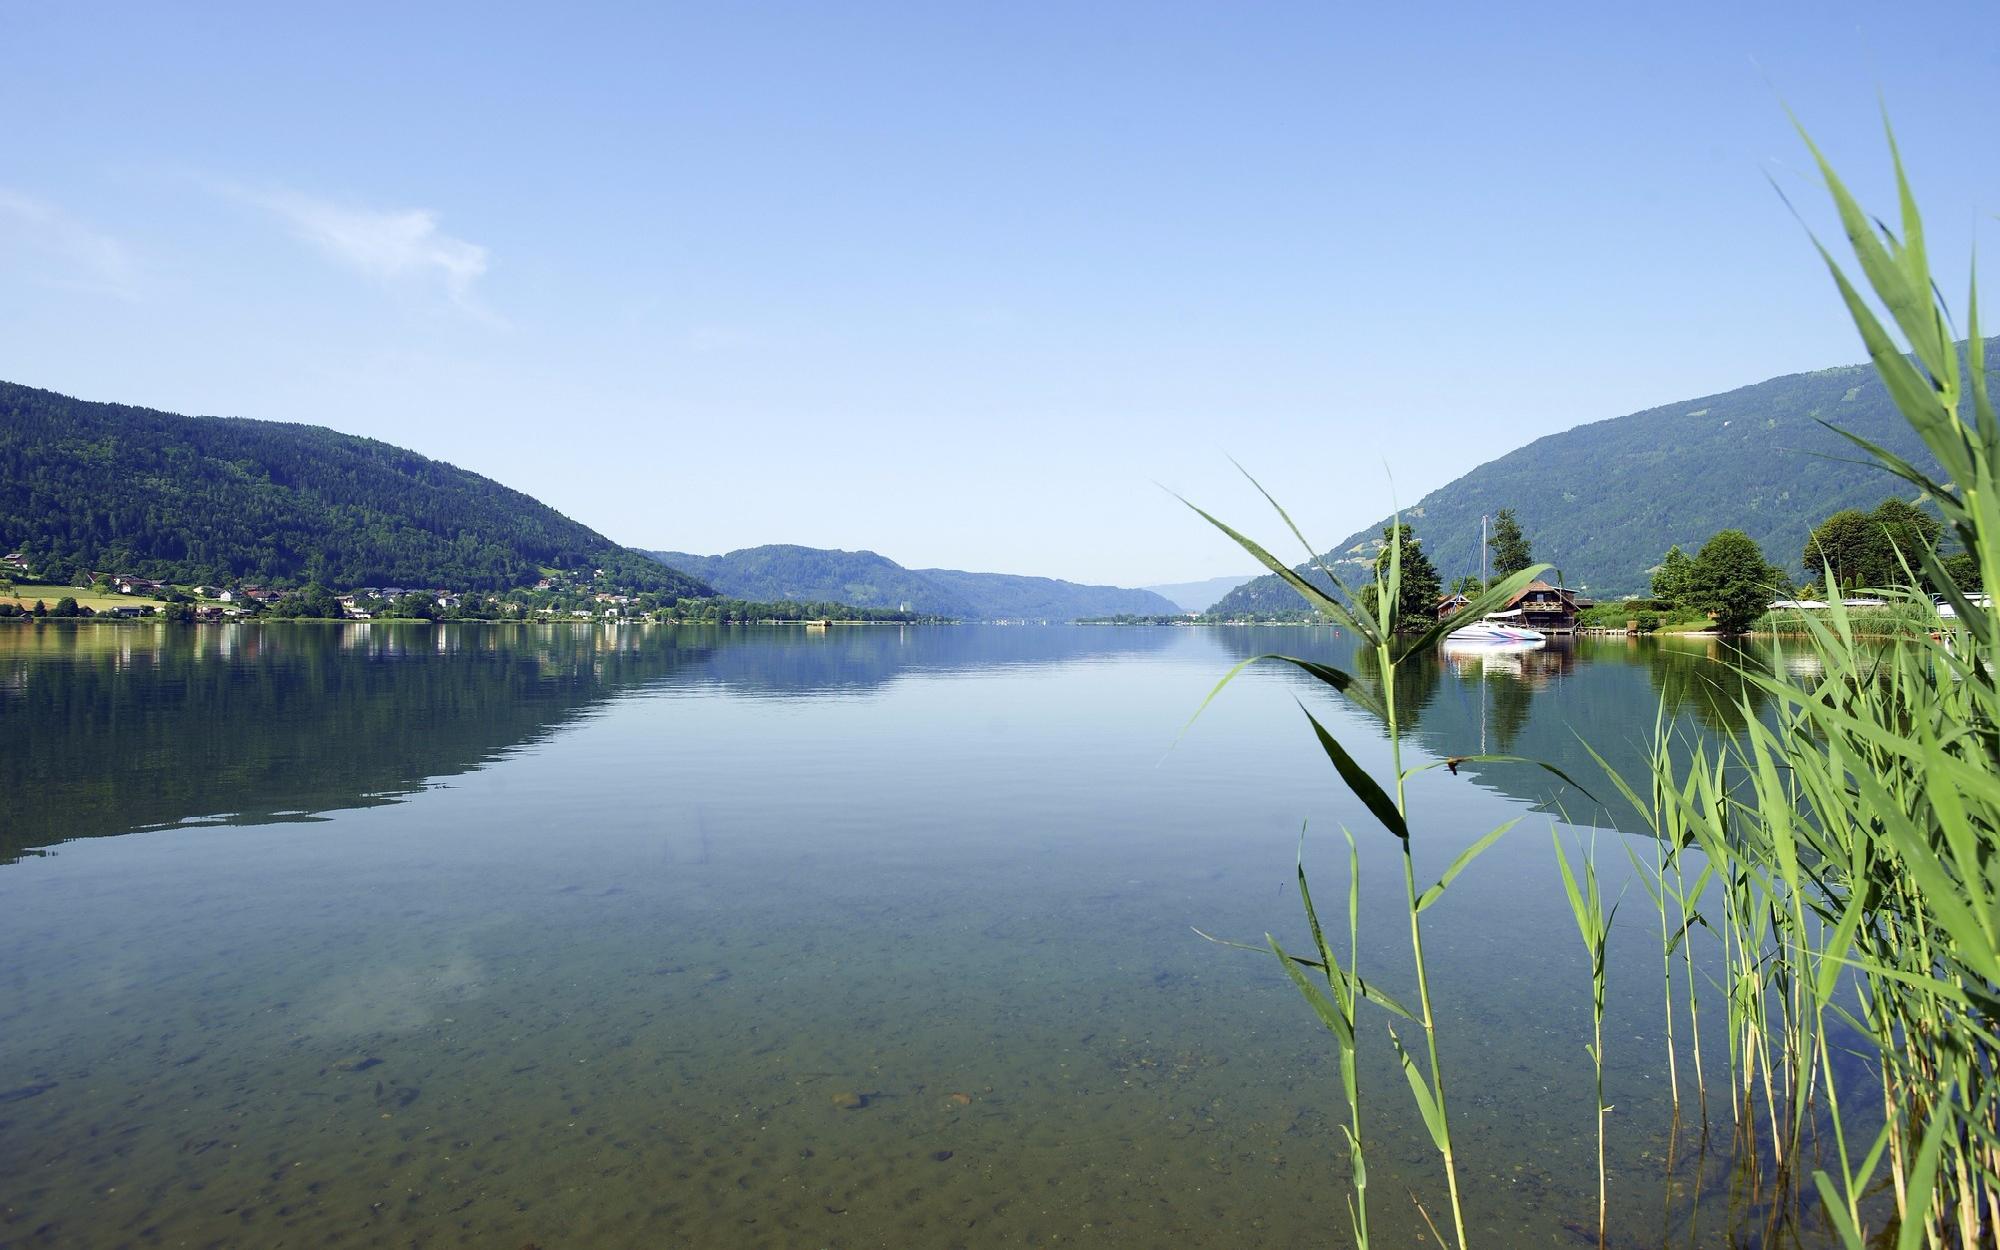 Villa in a sought-after residential area at the Ossiachersee